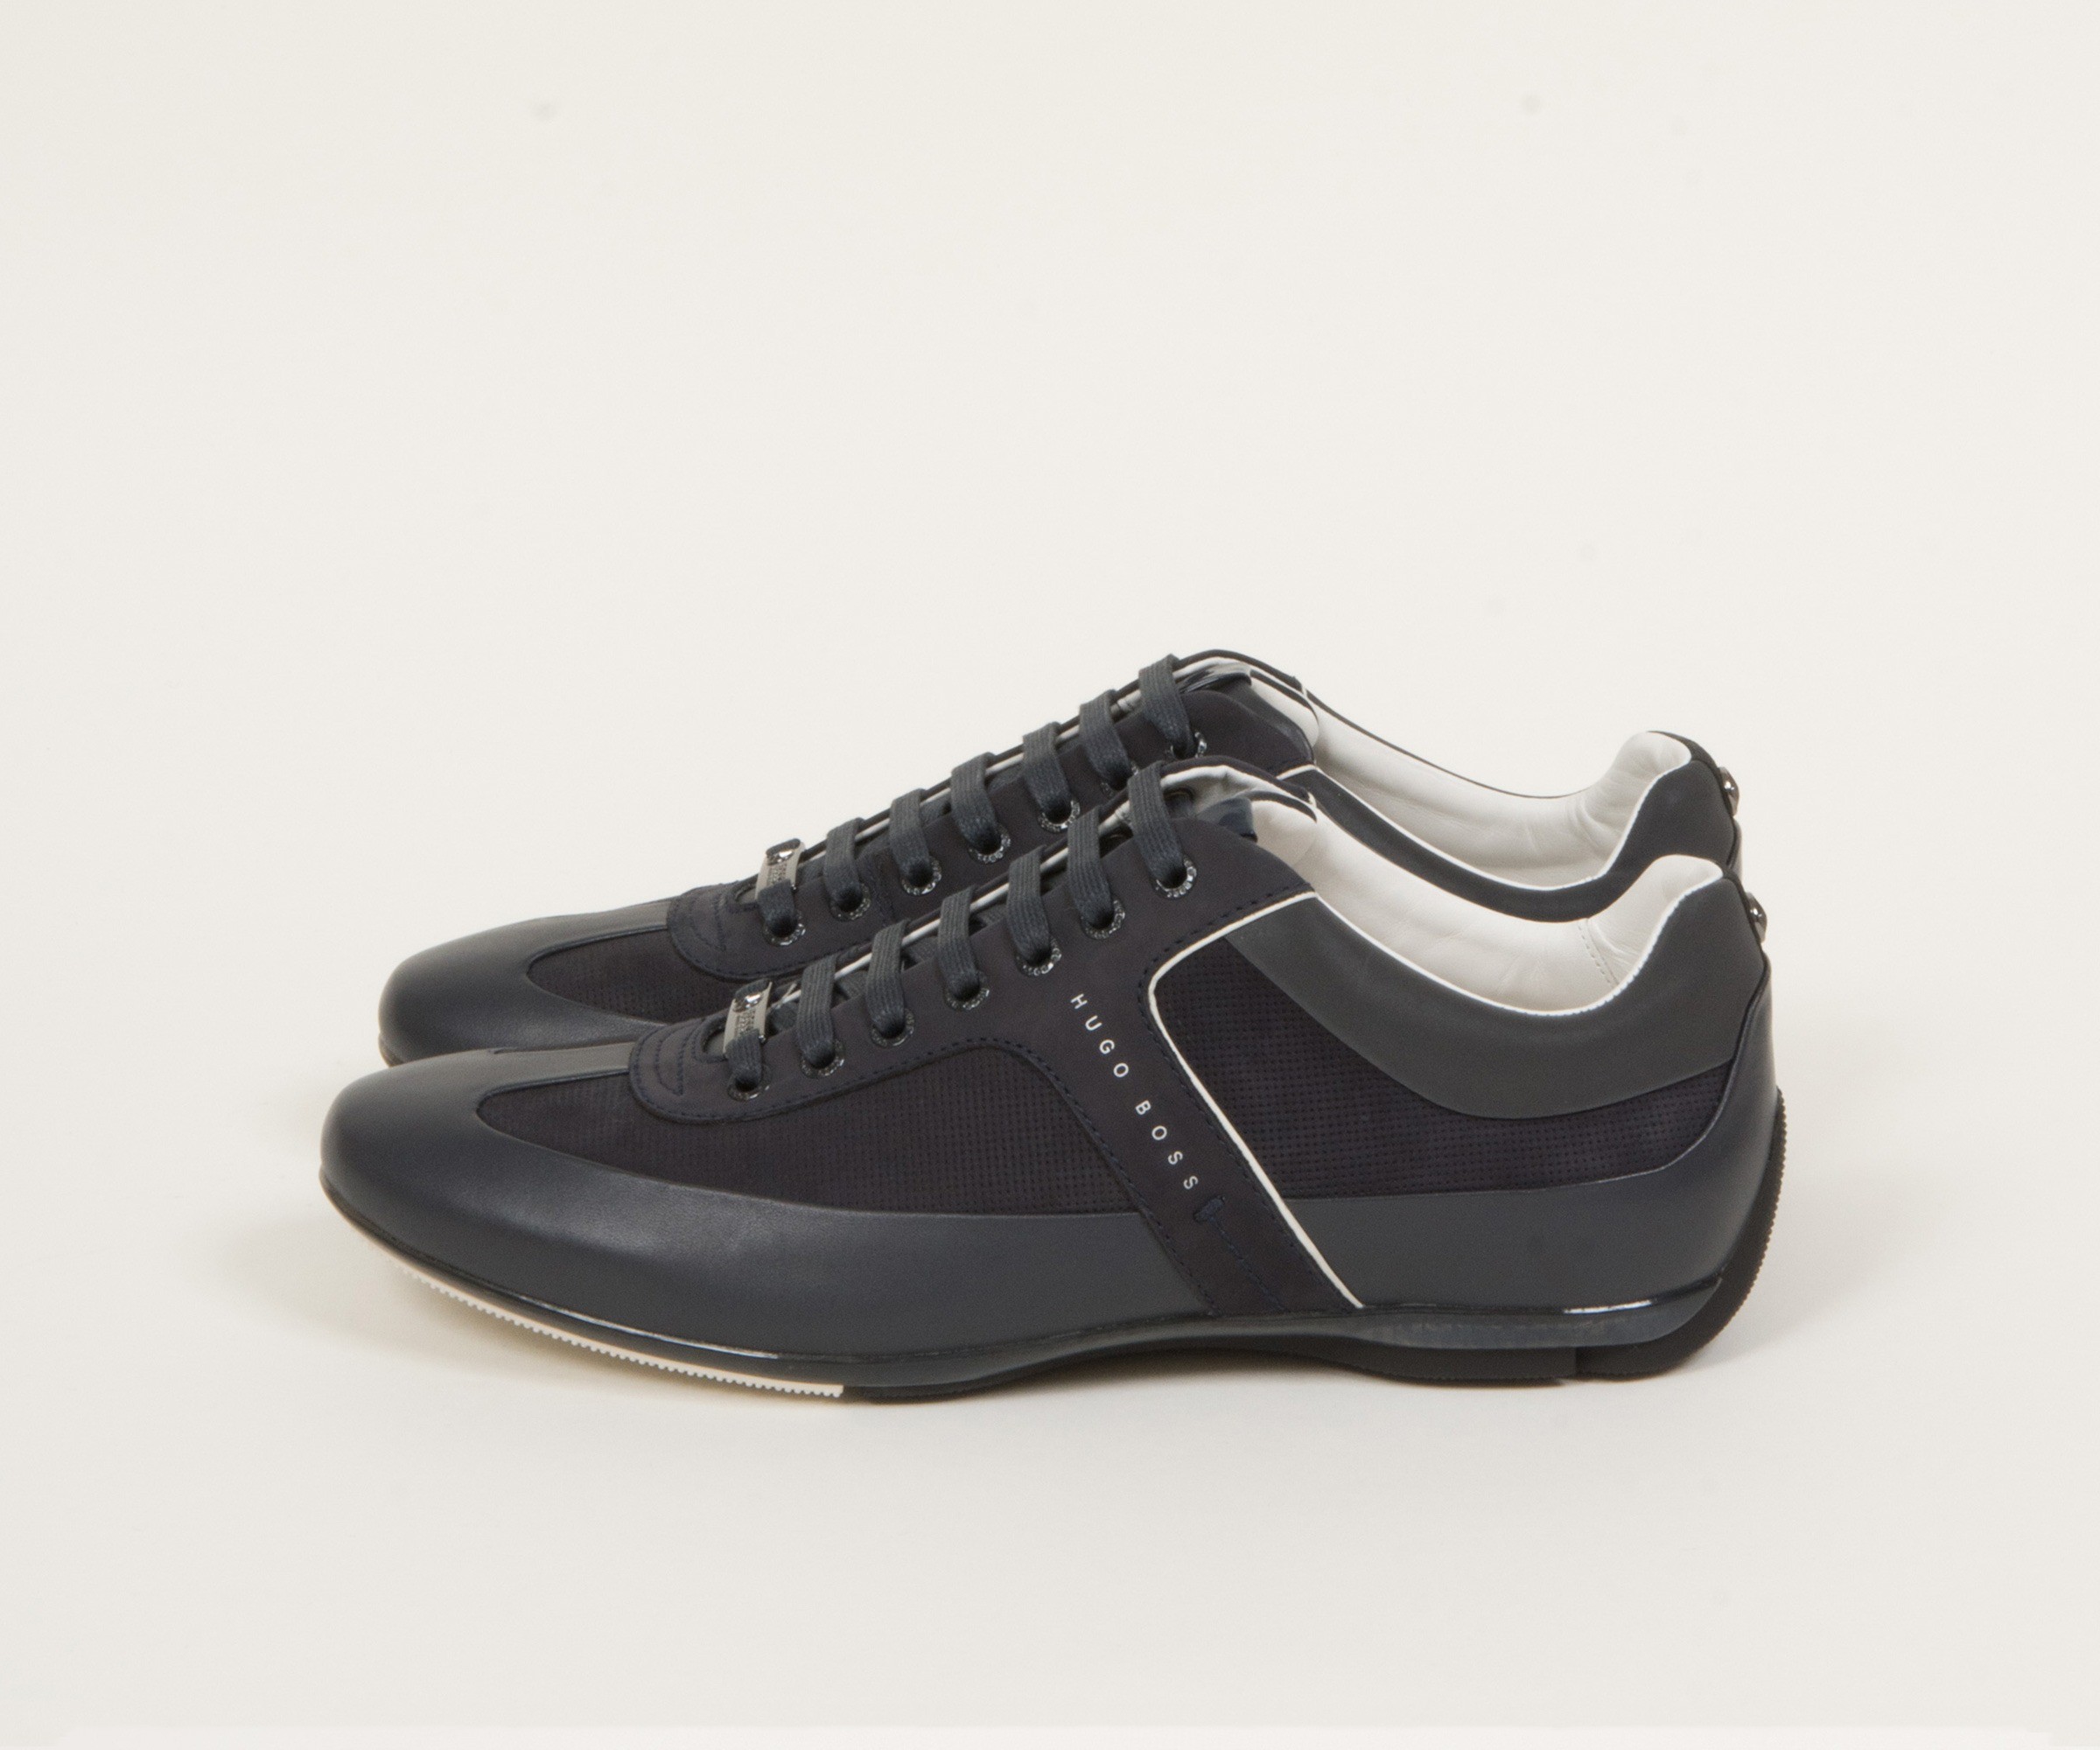 Hugo Boss 'Merceso' Leather and Suede Racing Trainer Dark Blue